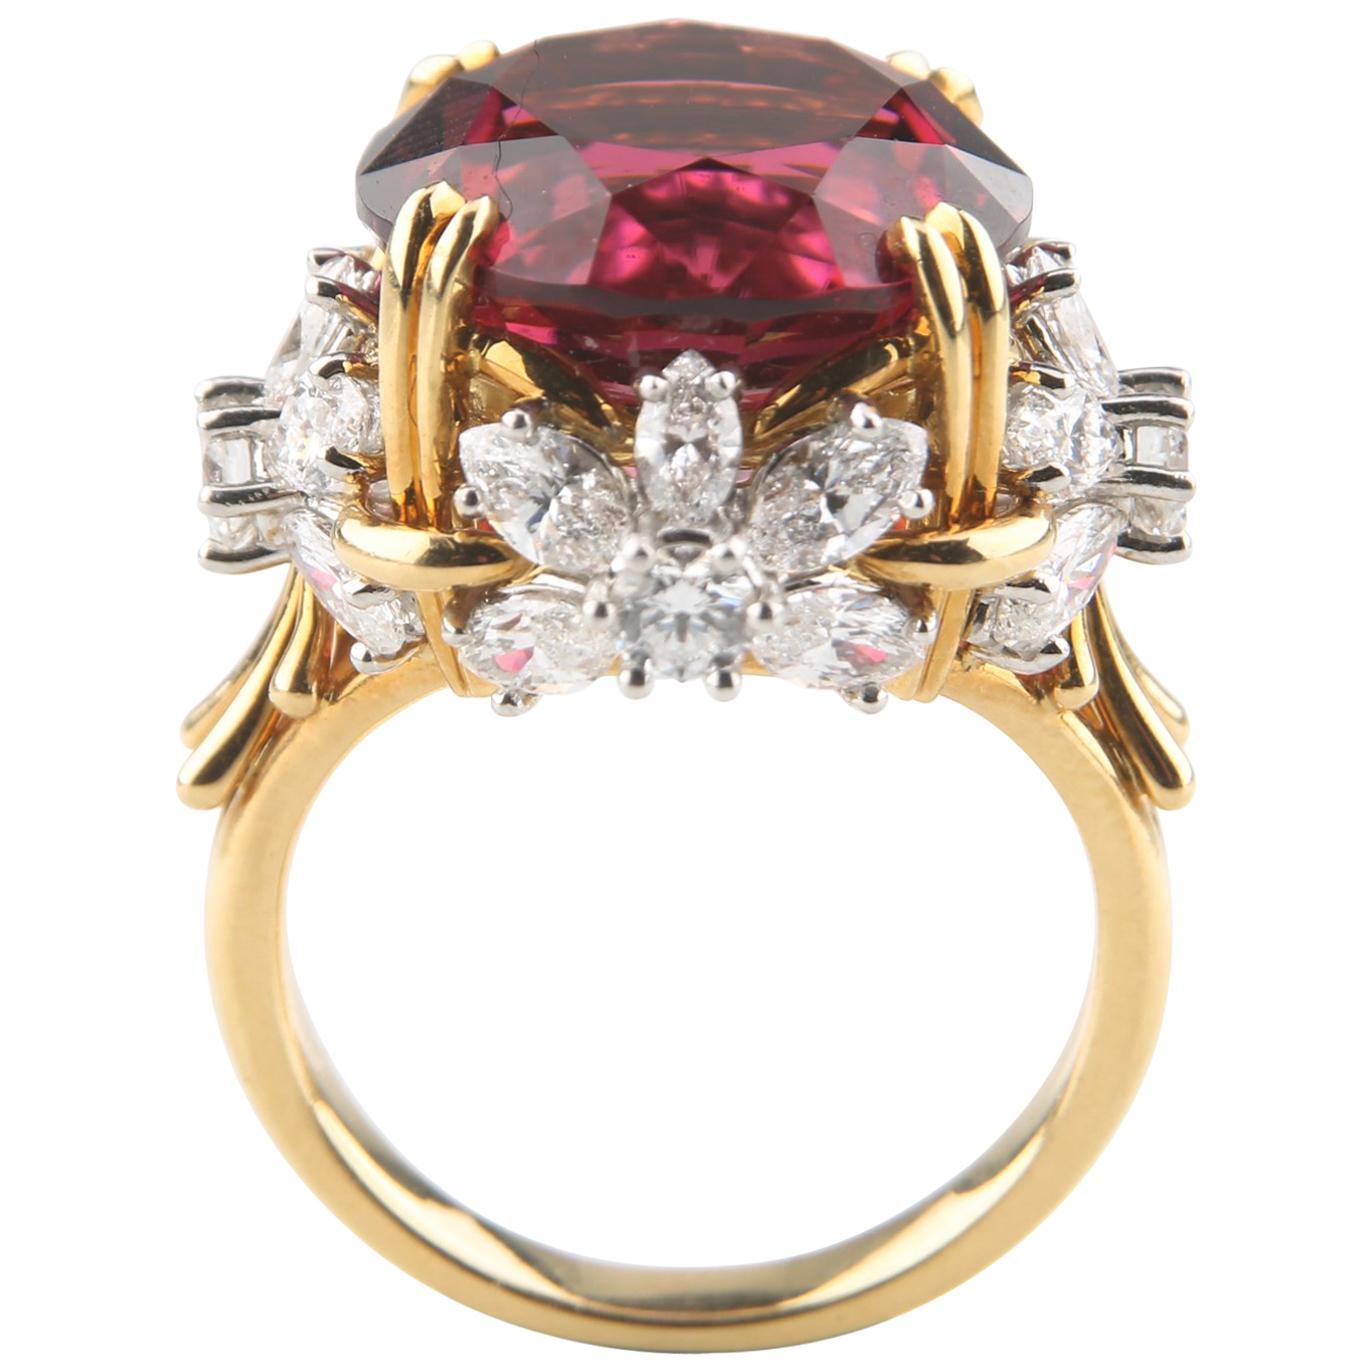 pink tourmaline and diamond flower ring designed by Schlumberger